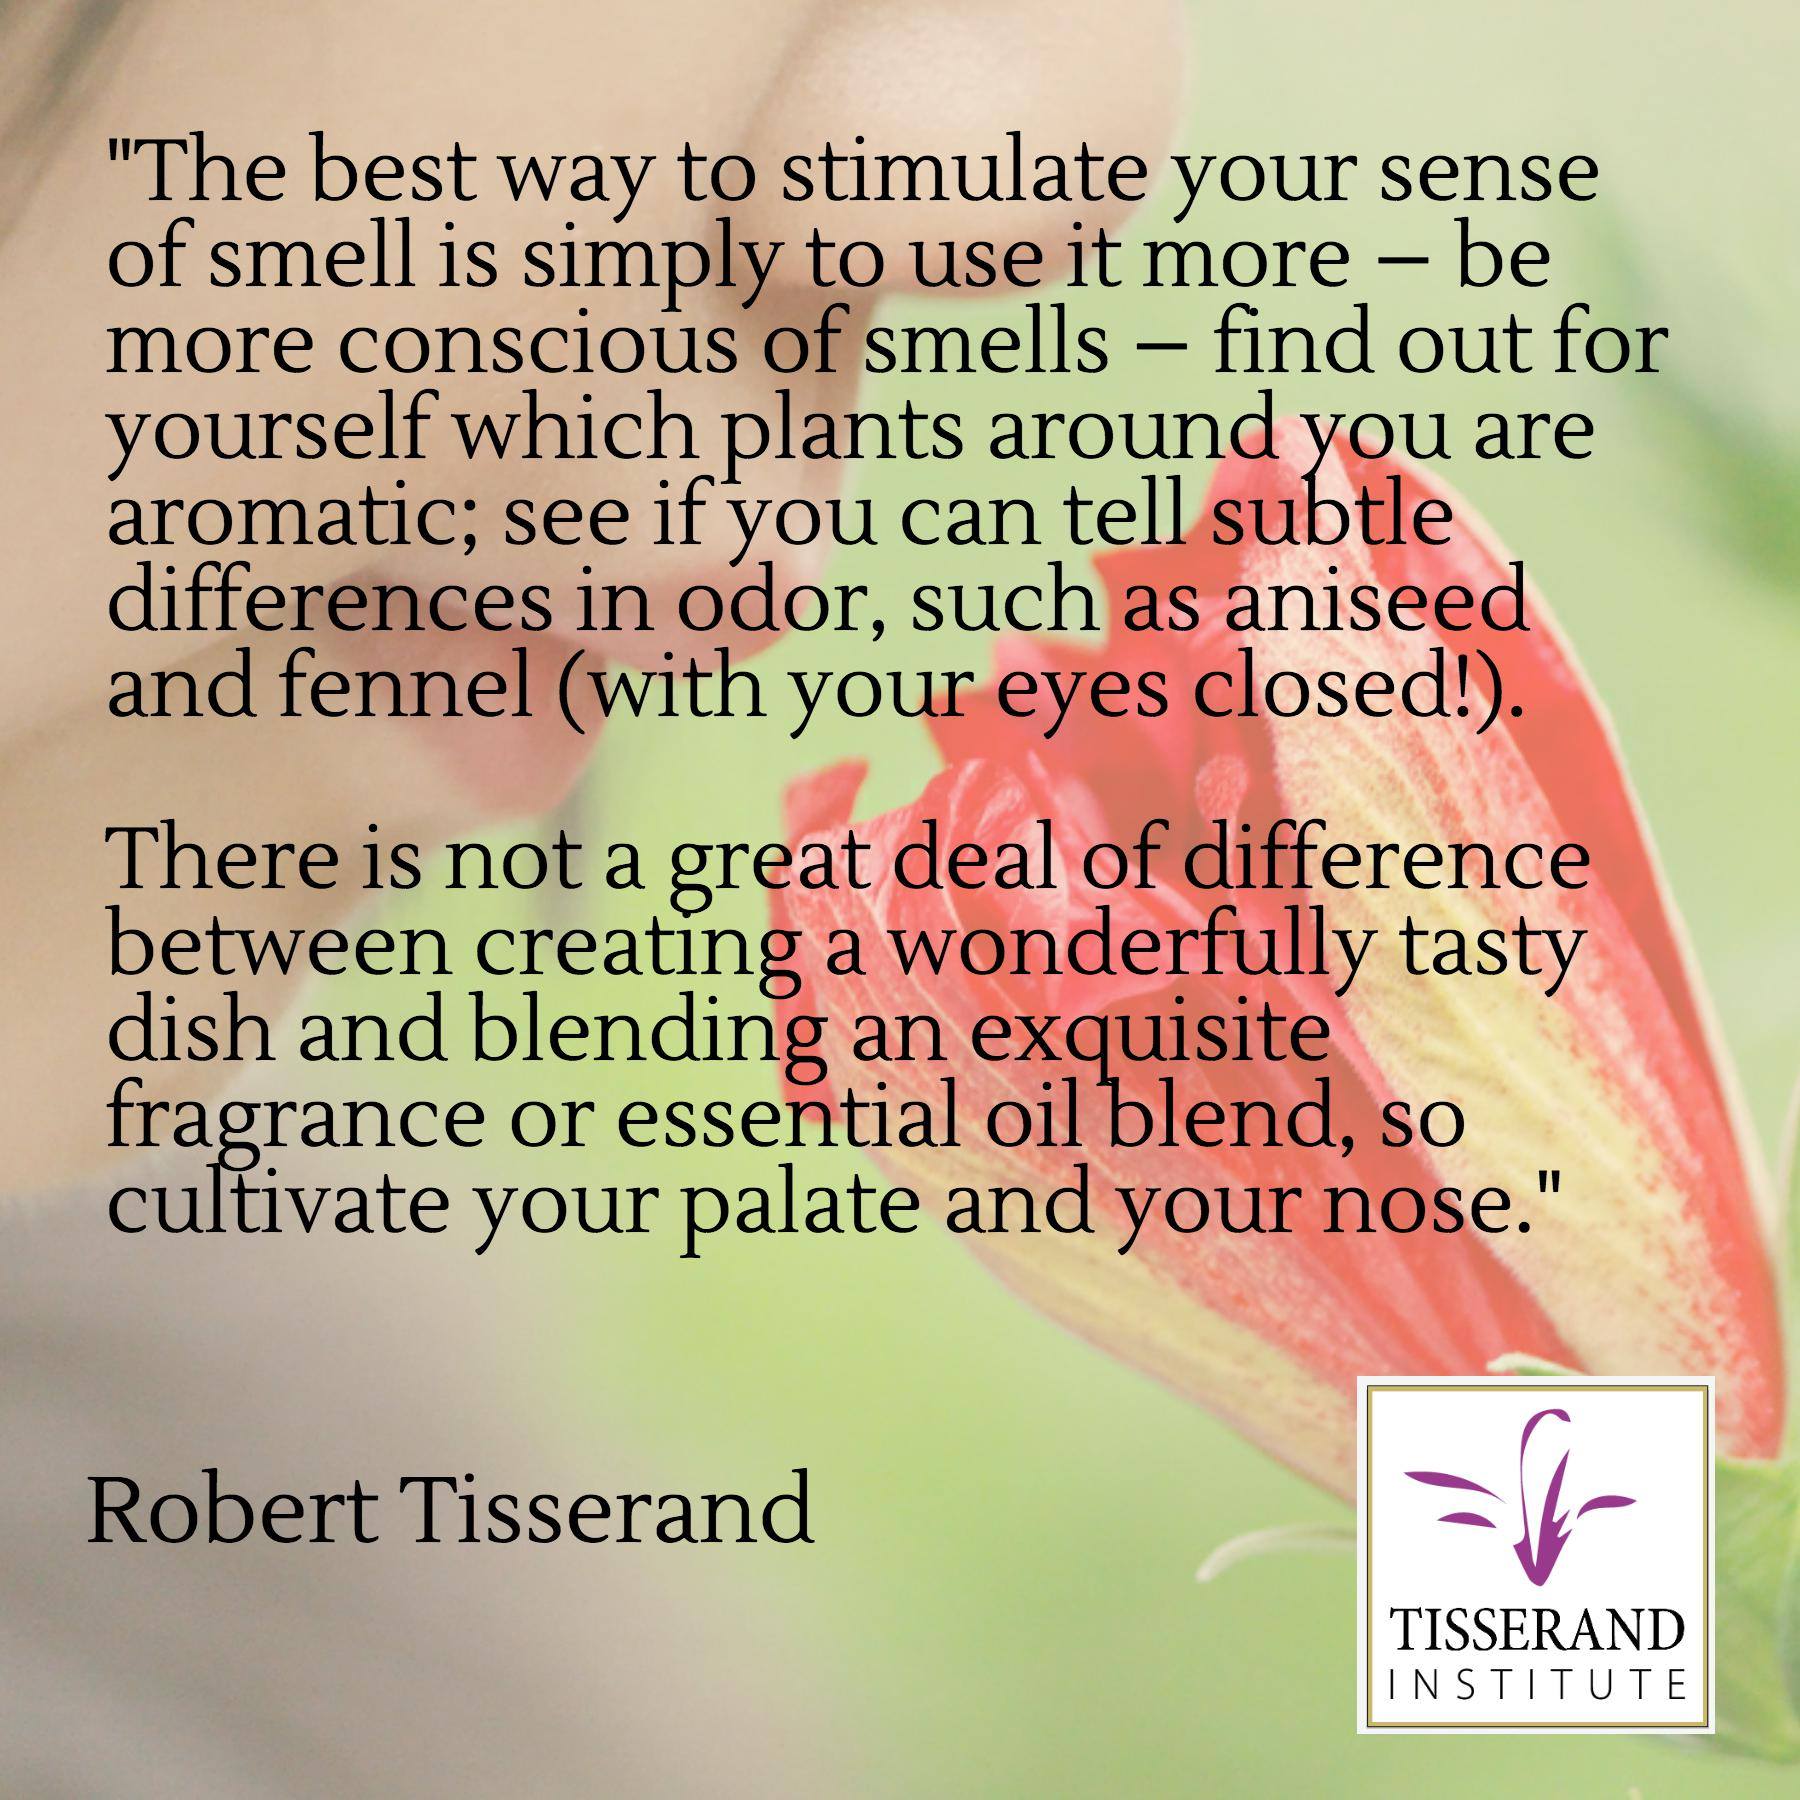 Stimulating your sense of smell